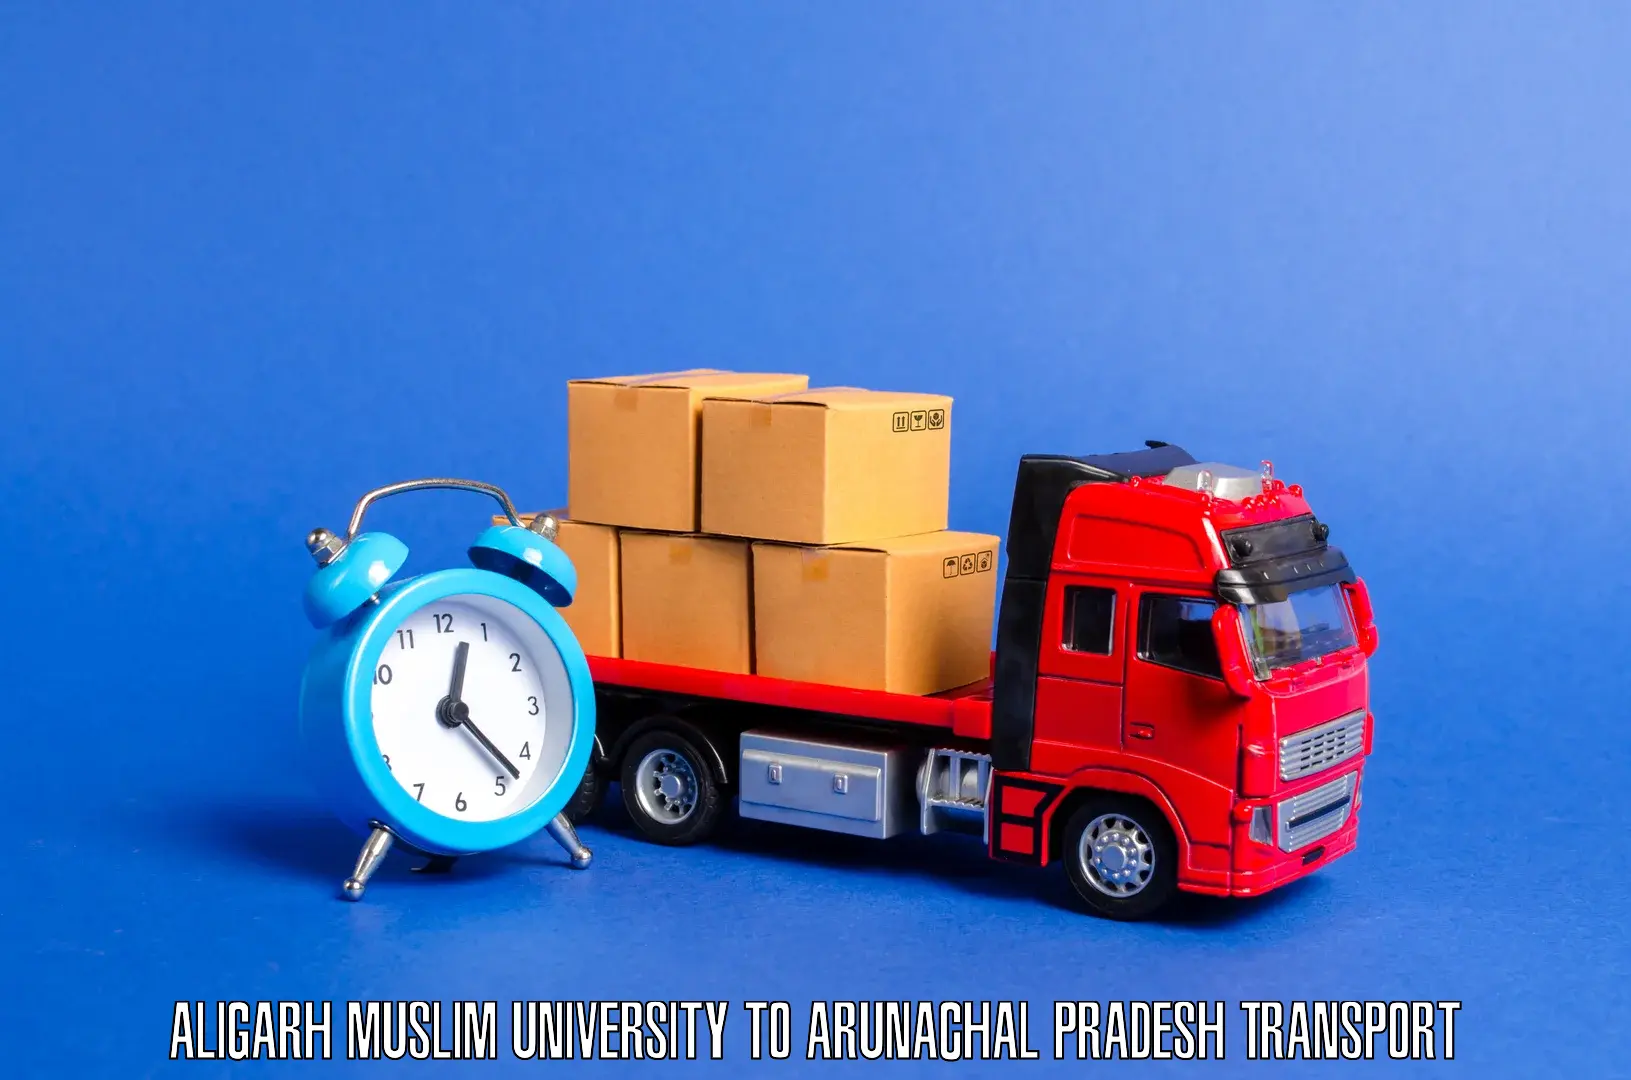 Express transport services Aligarh Muslim University to Lower Dibang Valley